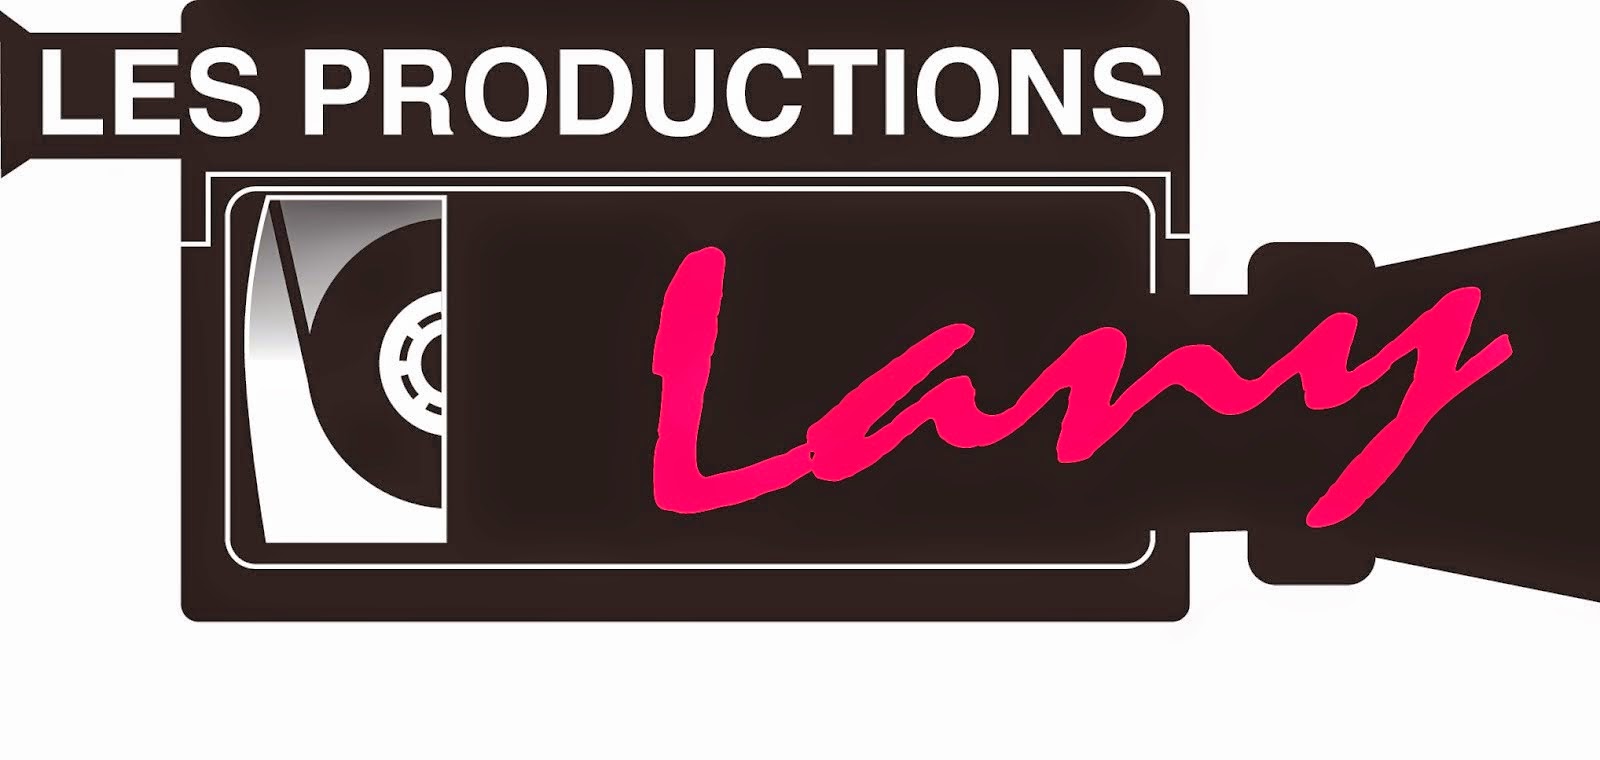 Les Productions Lany